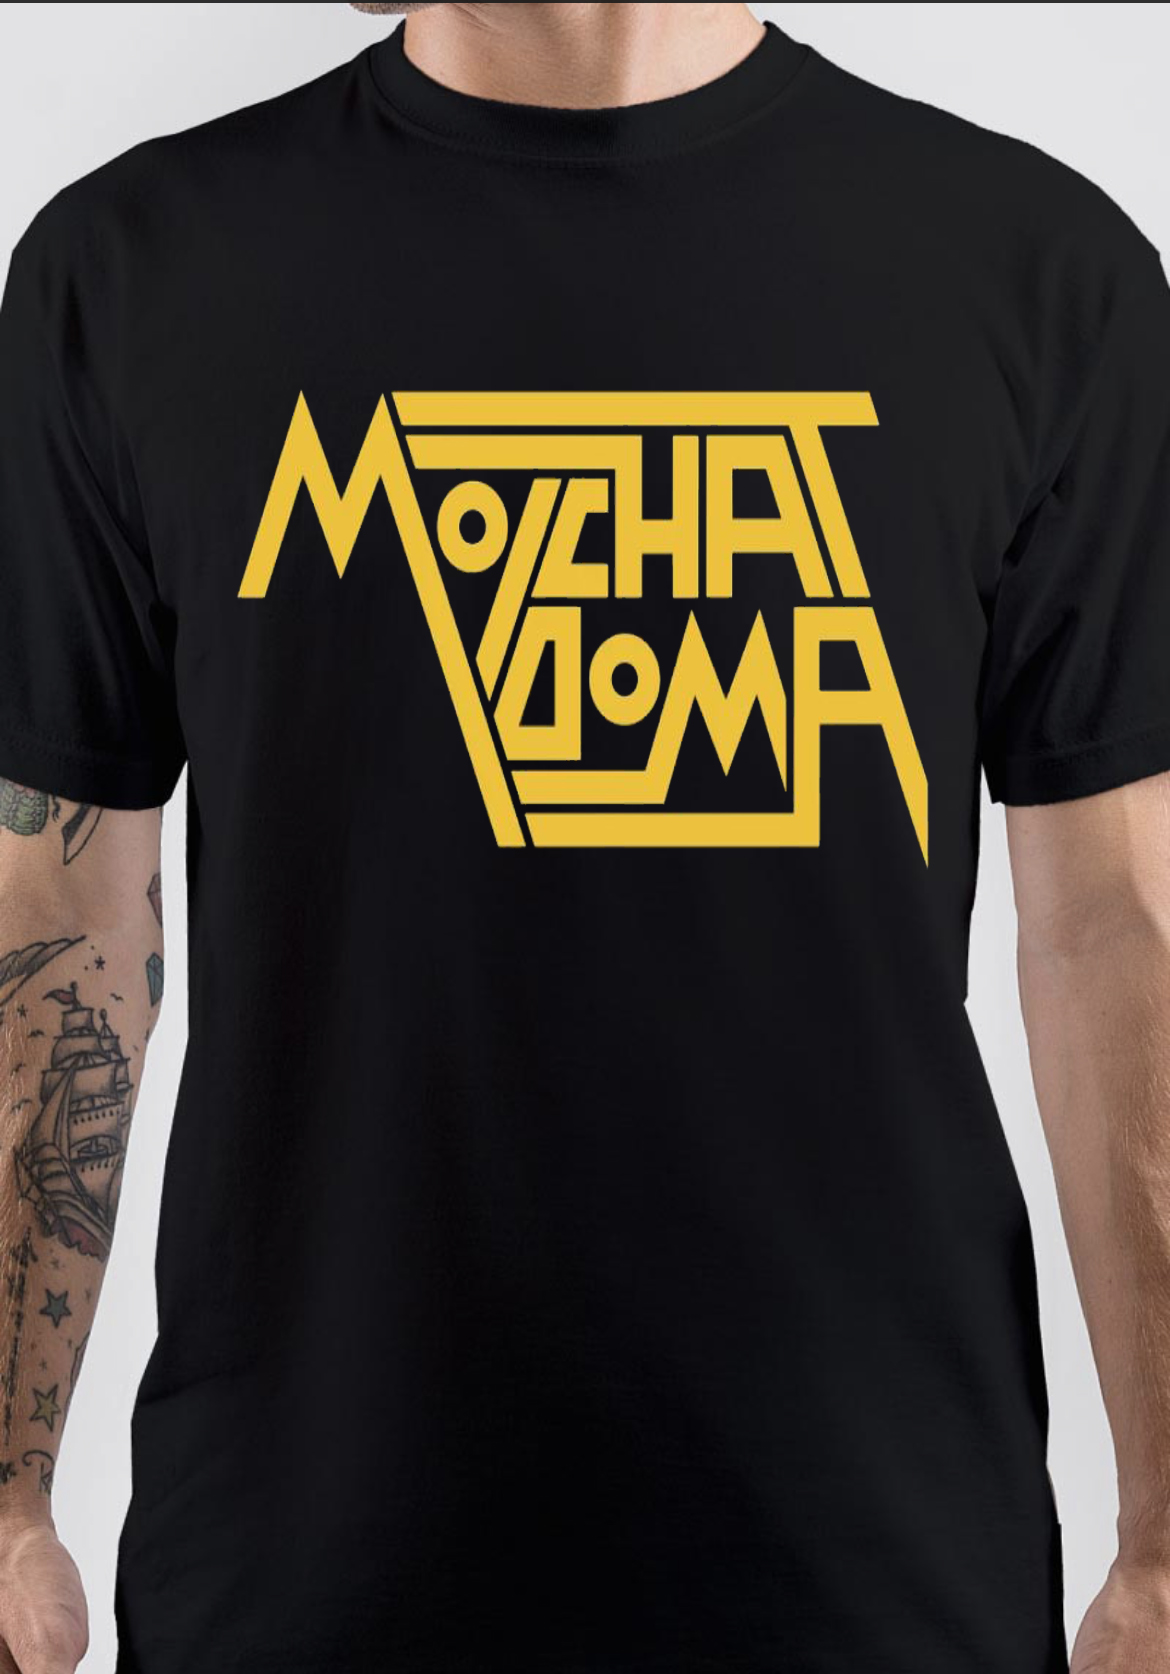 Molchat Doma T-Shirt And Merchandise